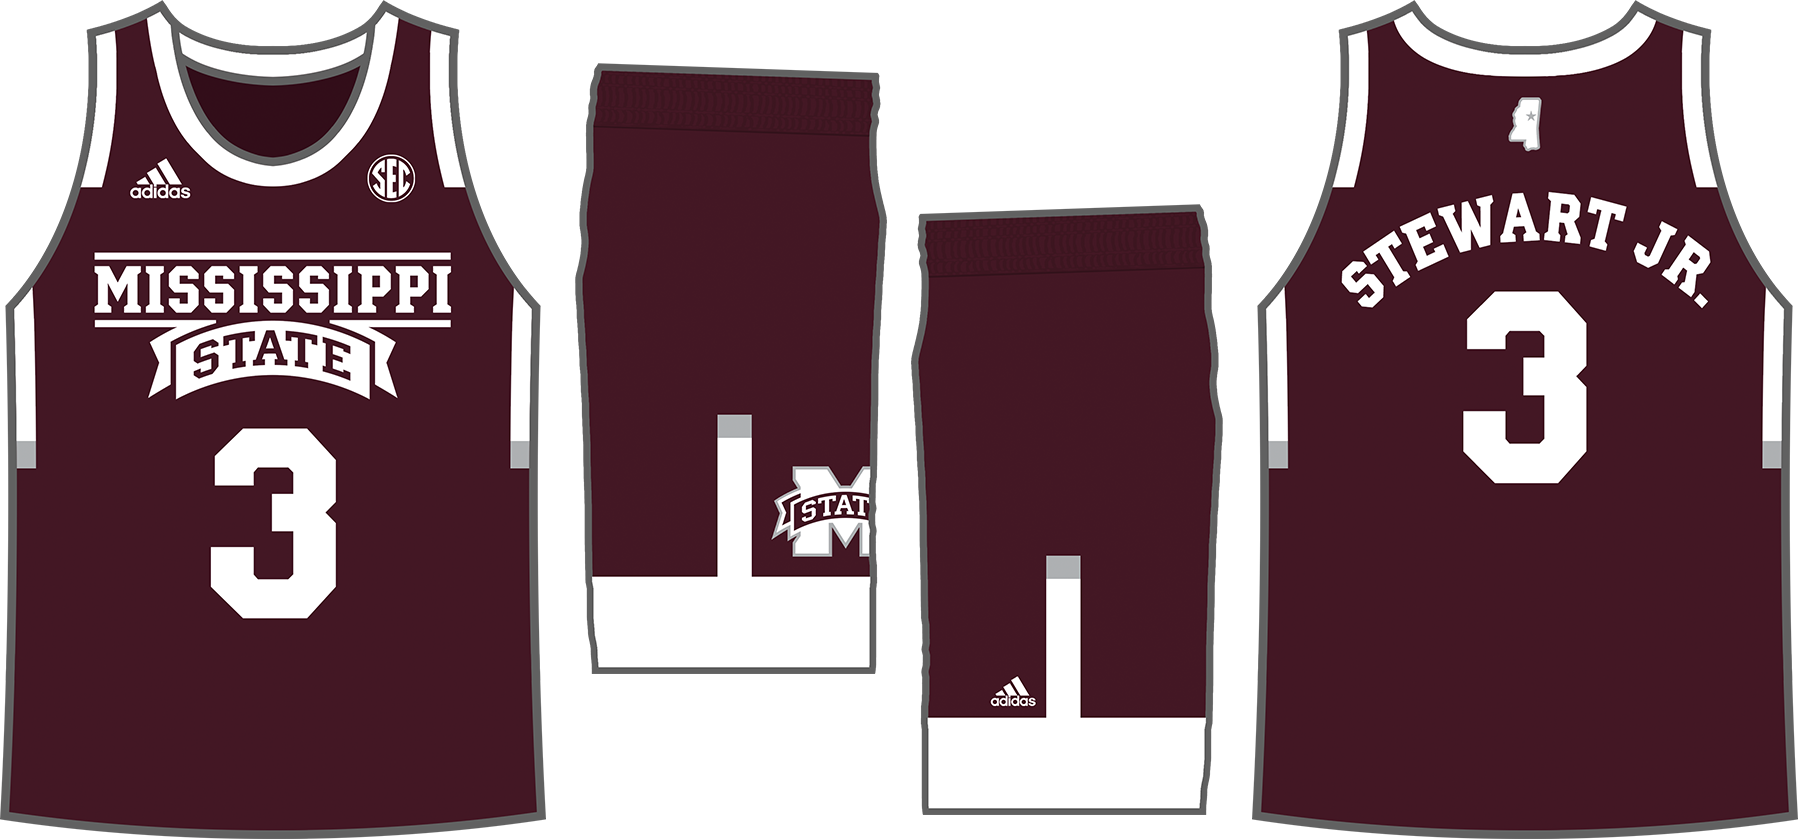 2019 Basketball Uniforms Concept - Hail State Unis